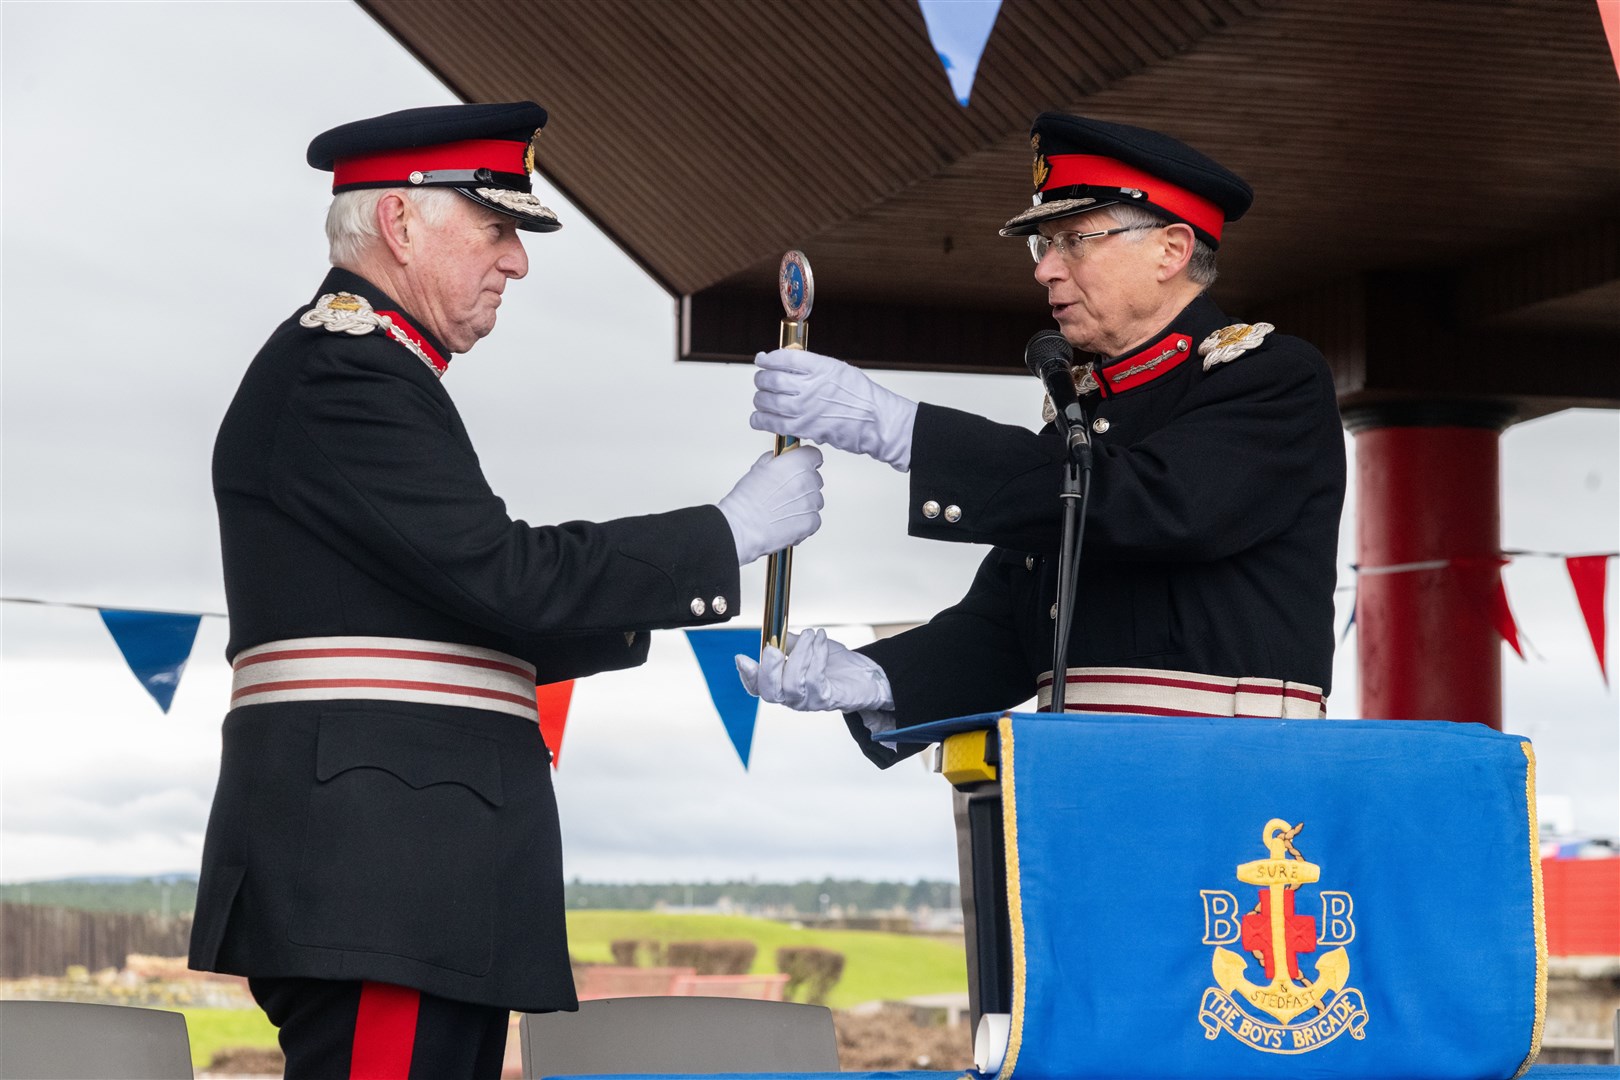 Lord-Lieutenant of Moray Seymour Monro receives the King's Baton from the Lord-Lieutenant of Banffshire Andrew Simpson...Boys' Brigade 140th anniversary in Lossiemouth...Picture: Beth Taylor.